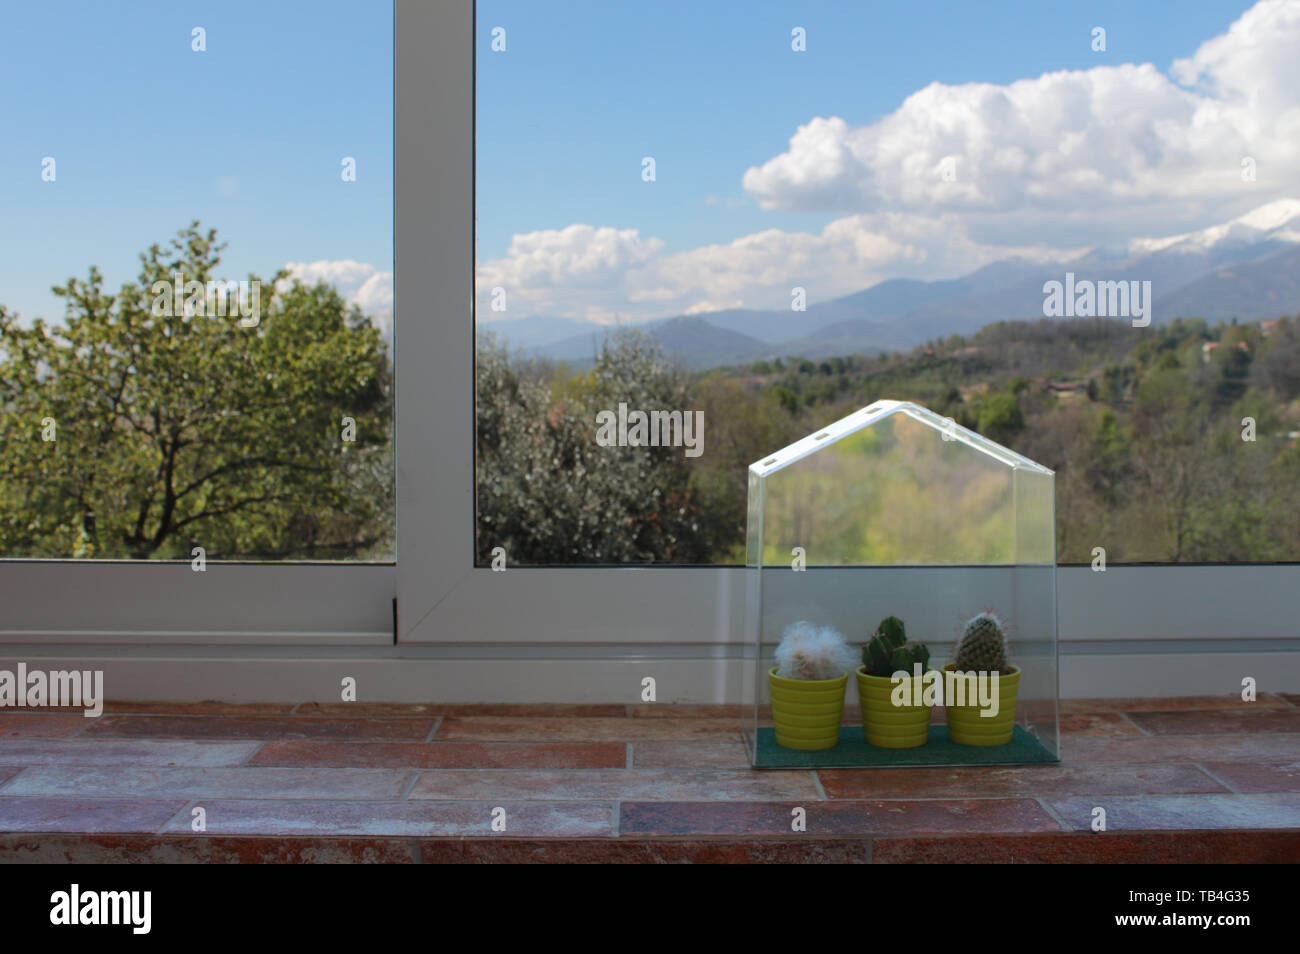 foreground cactus over a spring mountains landscape and snow still on mountains in the background, warm pool room image Stock Photo